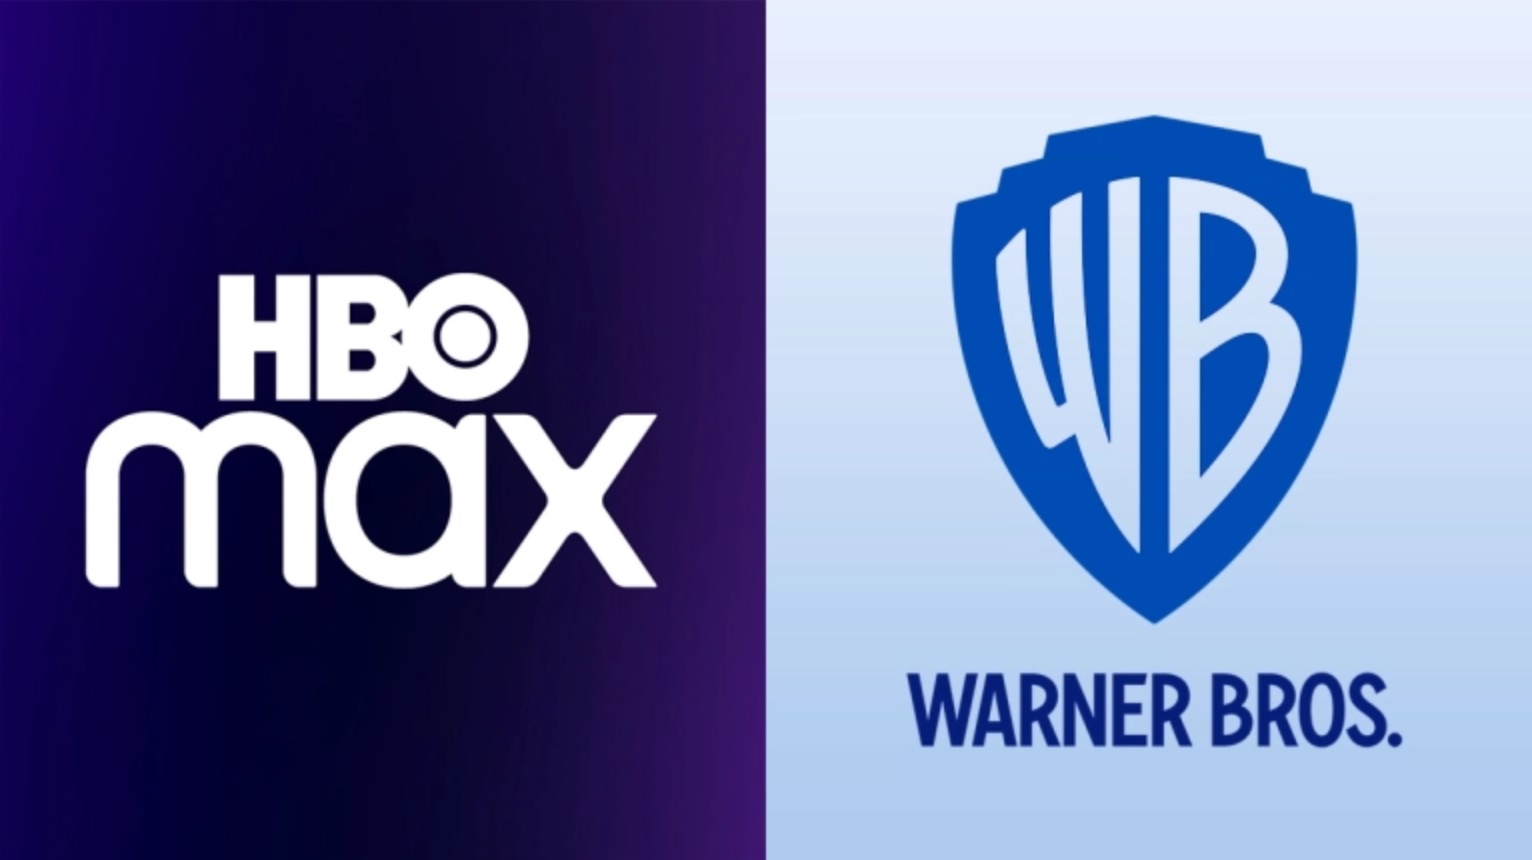 What Movies Are On Hbo Max That Are In Theaters : The 17 Disney Movies That Are on HBO Max Instead of Disney+ - Say hello to hbo max, the streaming platform that bundles all of hbo together with even more of your favorite movies and tv series, plus new max originals.